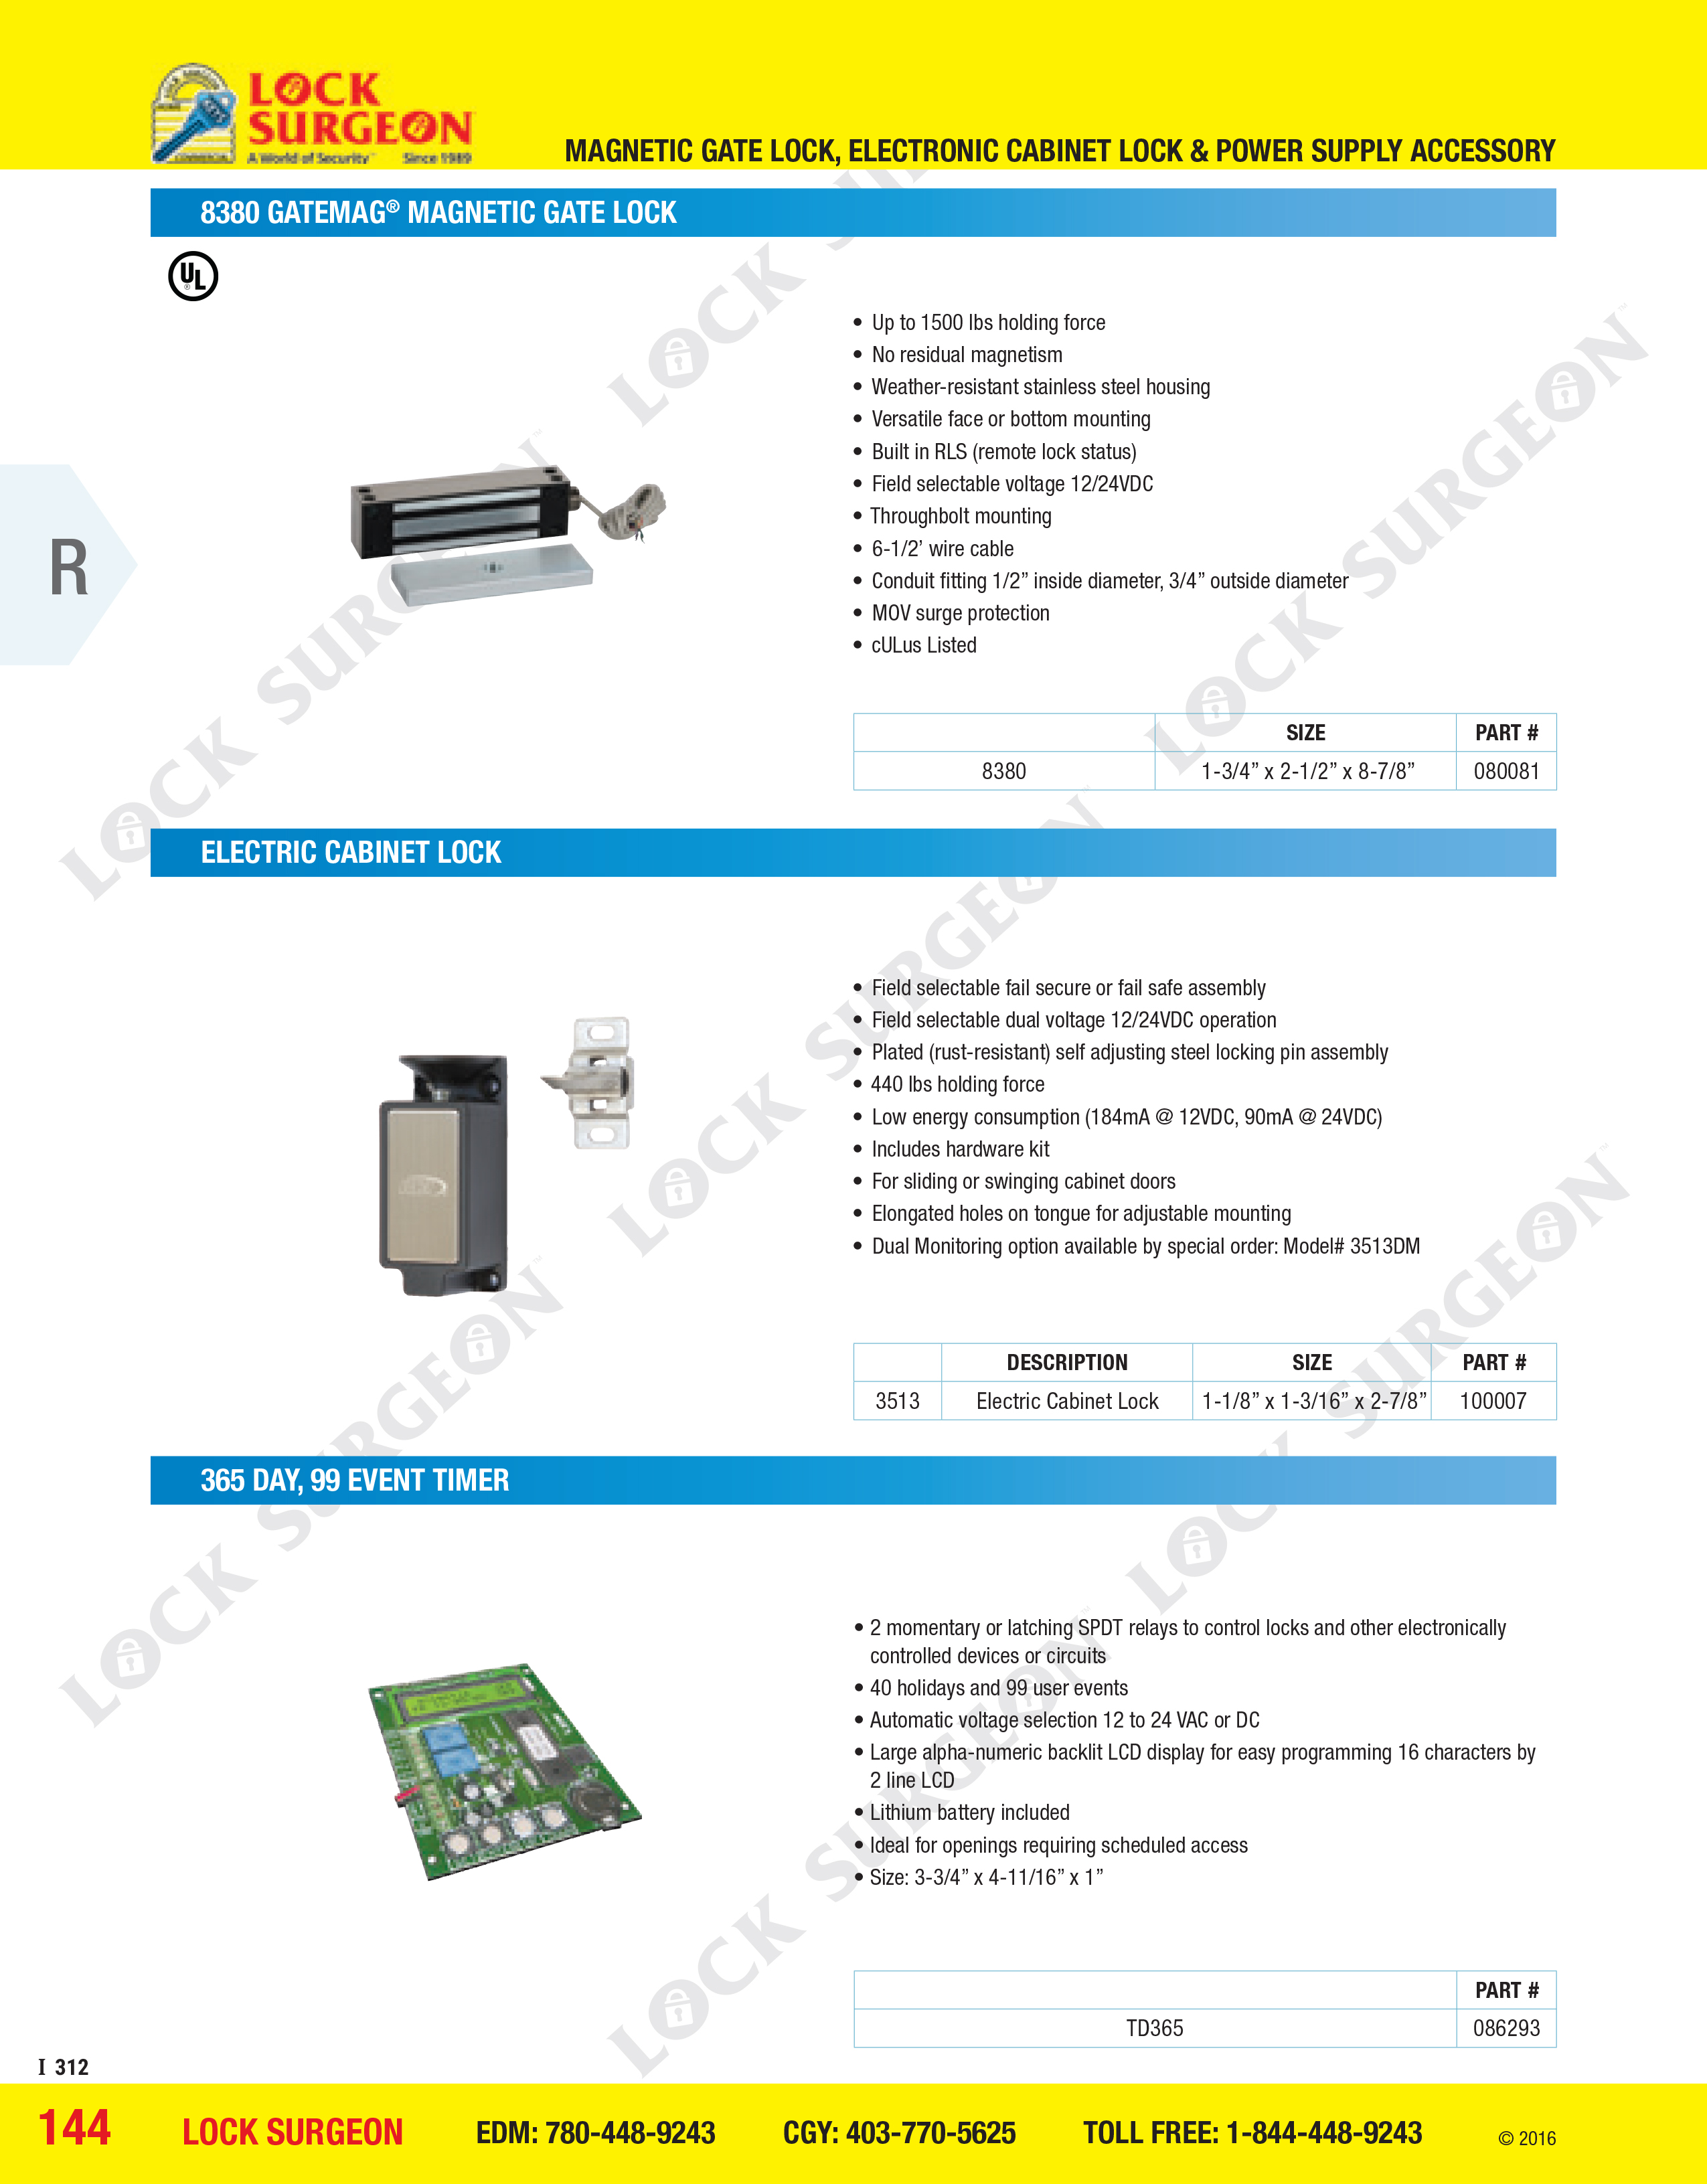 Magnetic Gate Lock, Electronic Cabinet Lock and Power Supply Accessory.